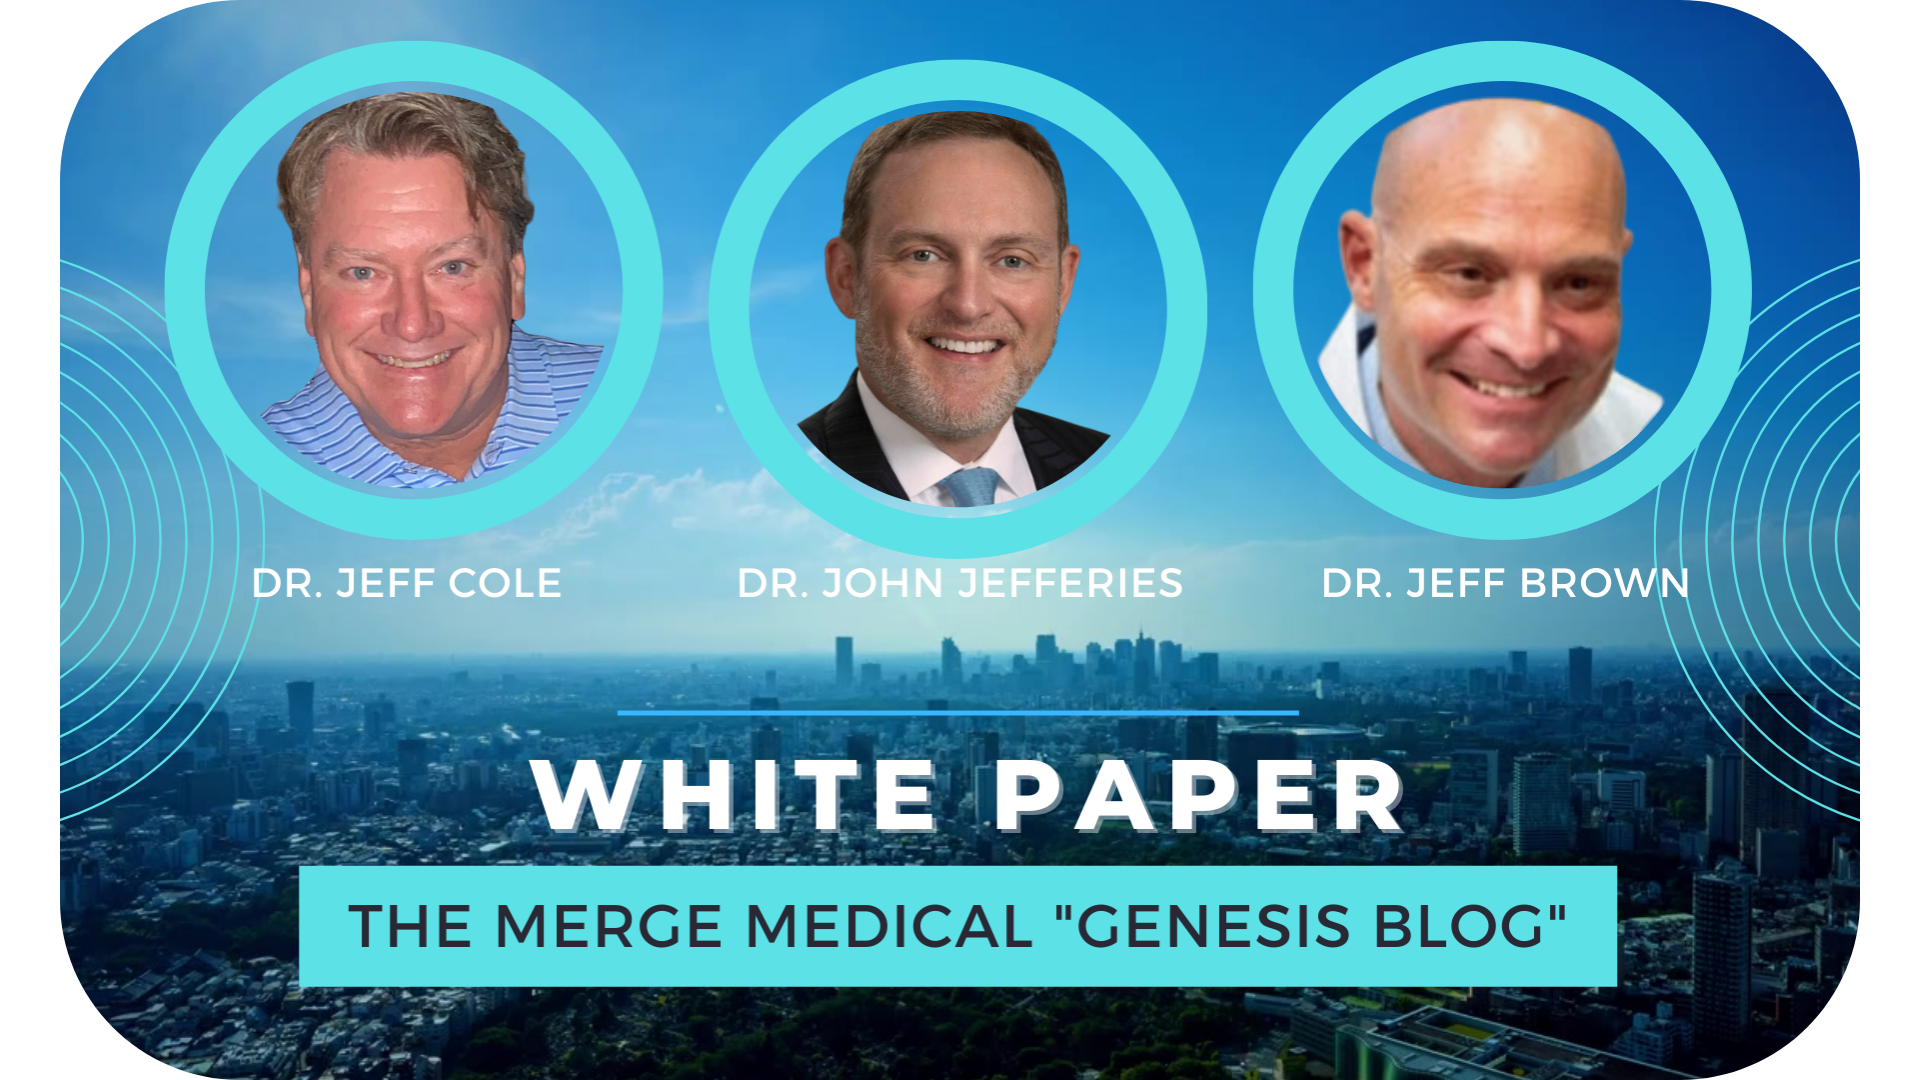 (Video Version) The Merge Medical “Genesis Blog”. If I had a billion dollars to improve healthcare and the healthcare profession: Hitting the target with Merge Medical